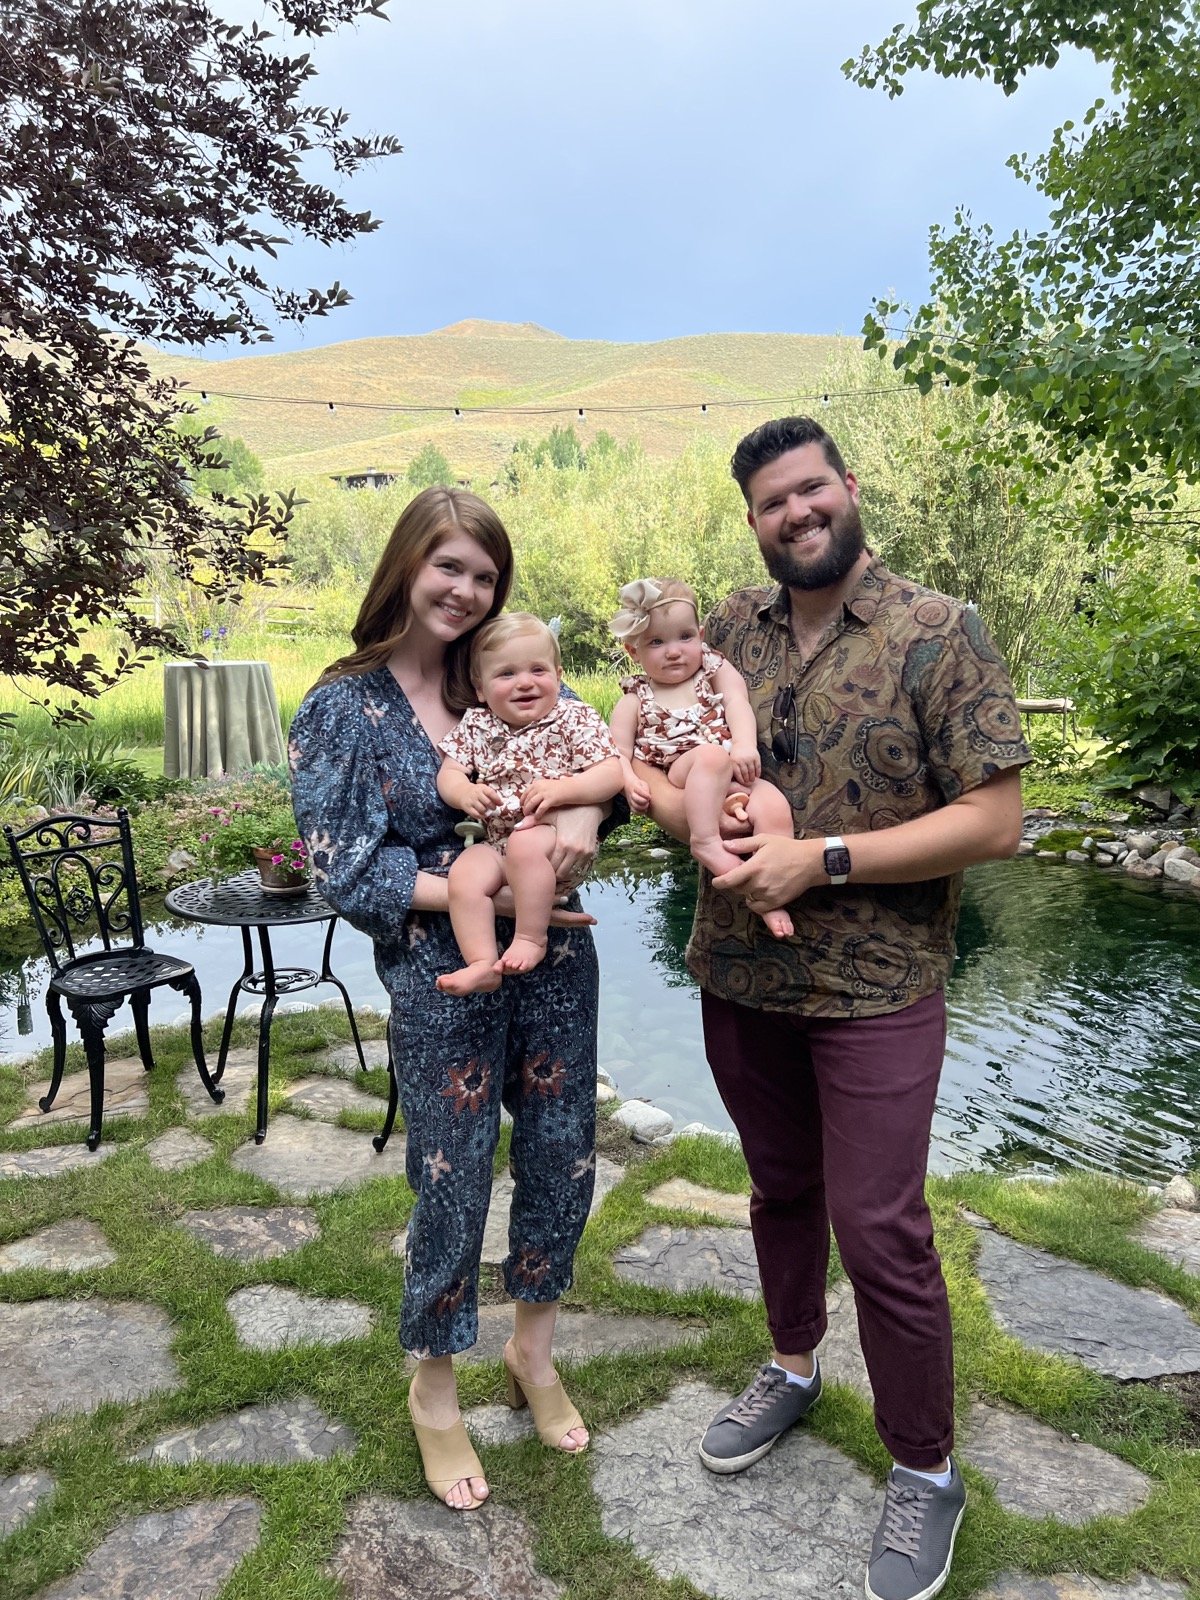 trip to sun valley, idaho, boise, id, itinerary, what to do, summer in sun valley, lments of style, family trip with twins , ketchum